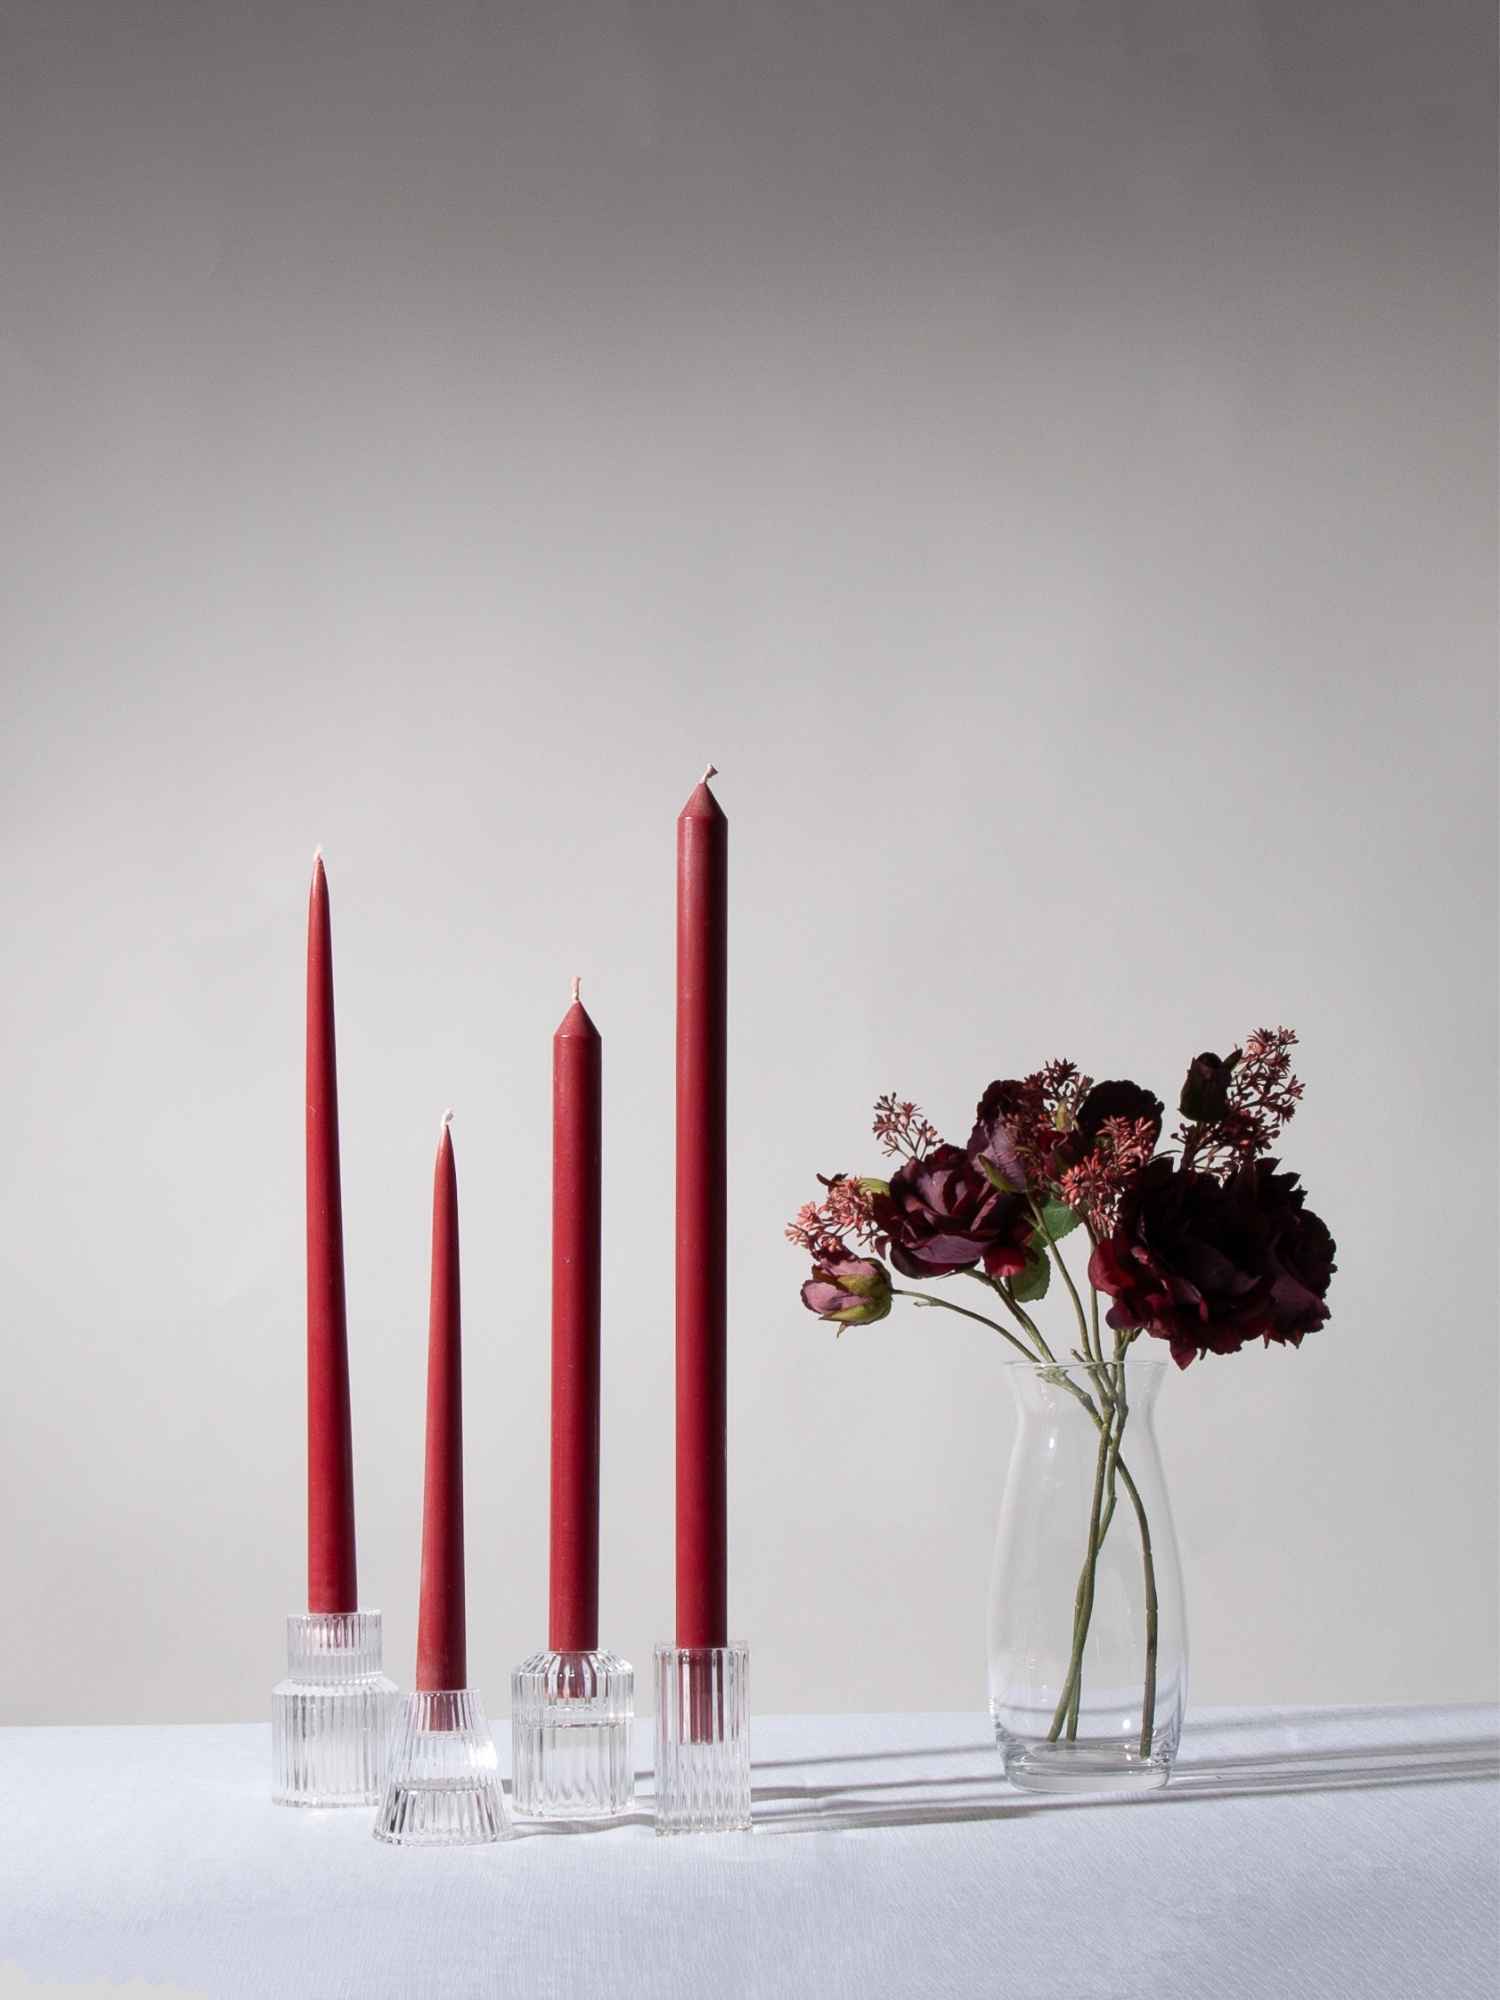 Burgundy 40cm Dinner Candle, Pack of 4